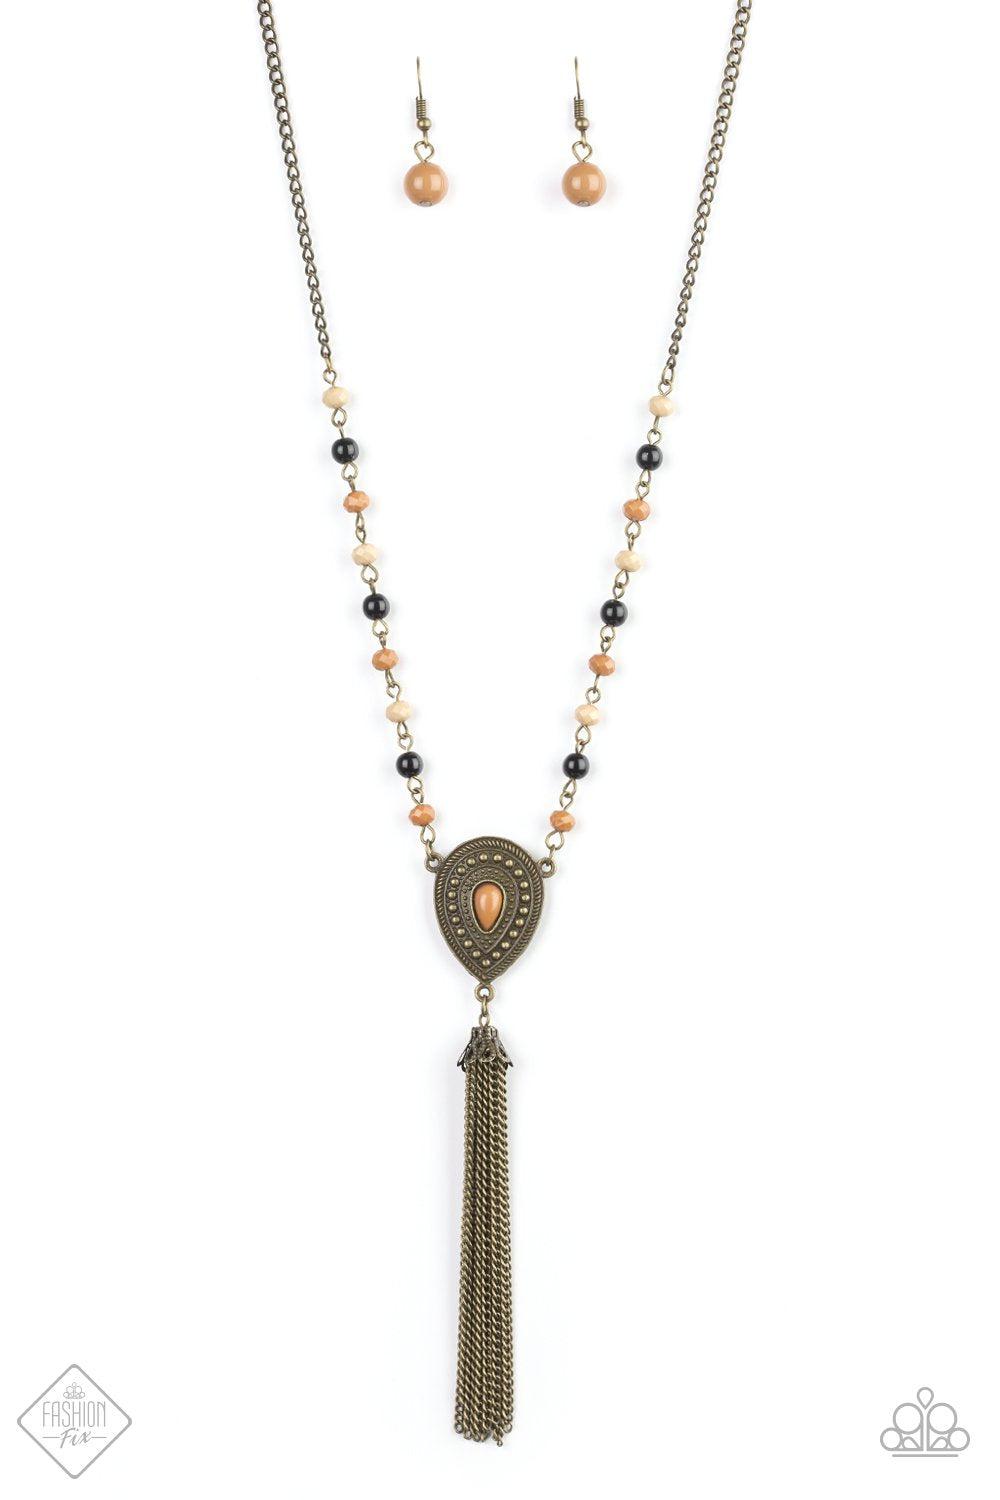 Soul Quest Multi-color Bead and Brass Tassel Necklace - Paparazzi Accessories-CarasShop.com - $5 Jewelry by Cara Jewels